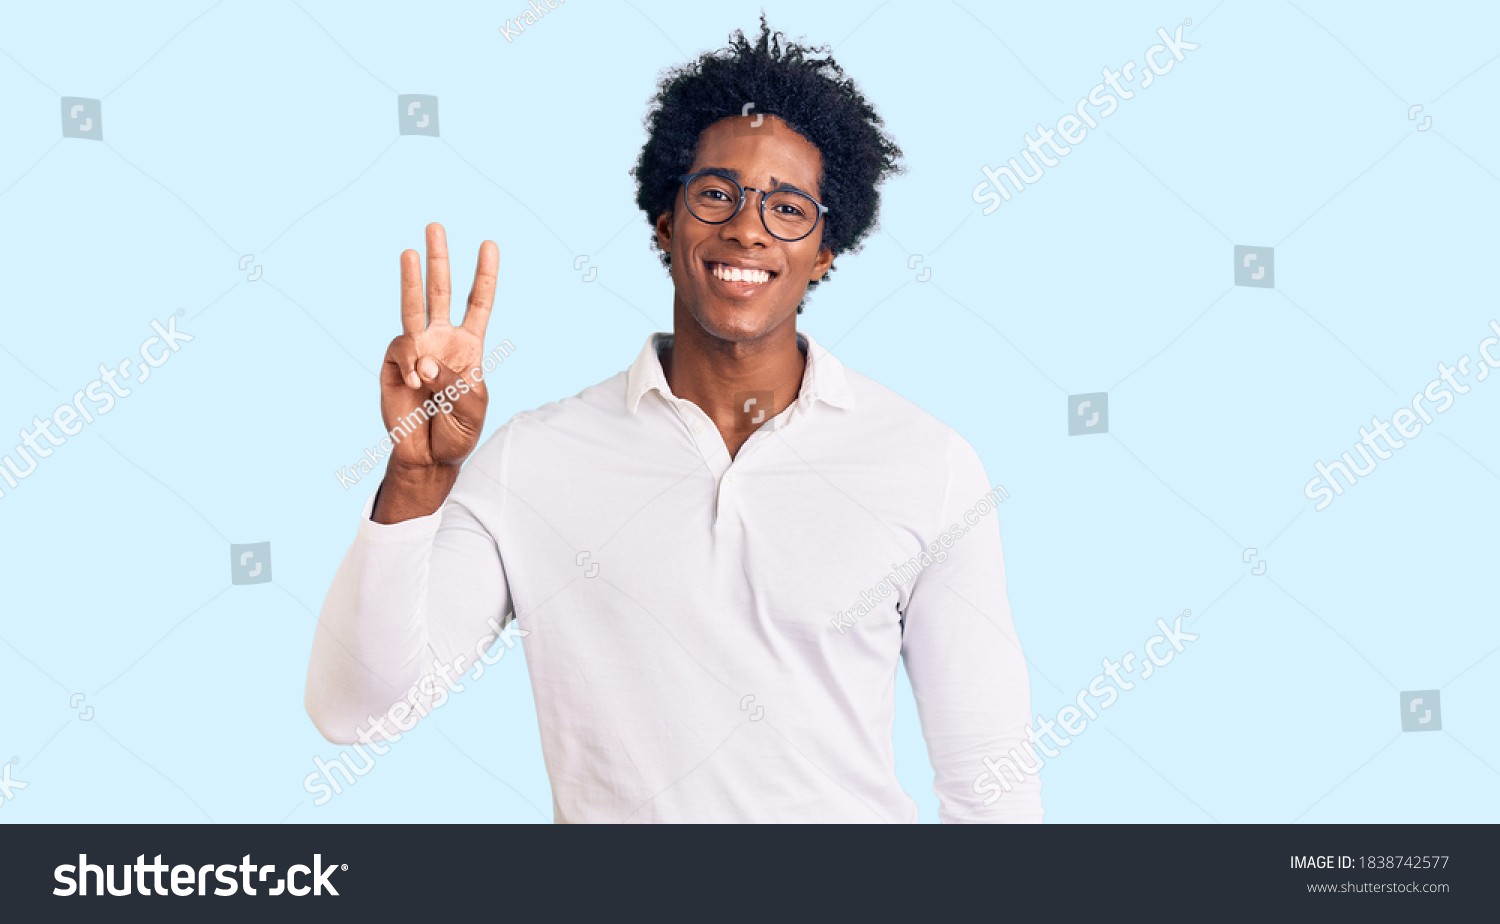 Handsome african american man with afro hair wearing casual clothes and glasses showing and pointing up with fingers number three while smiling confident and happy.  #1838742577